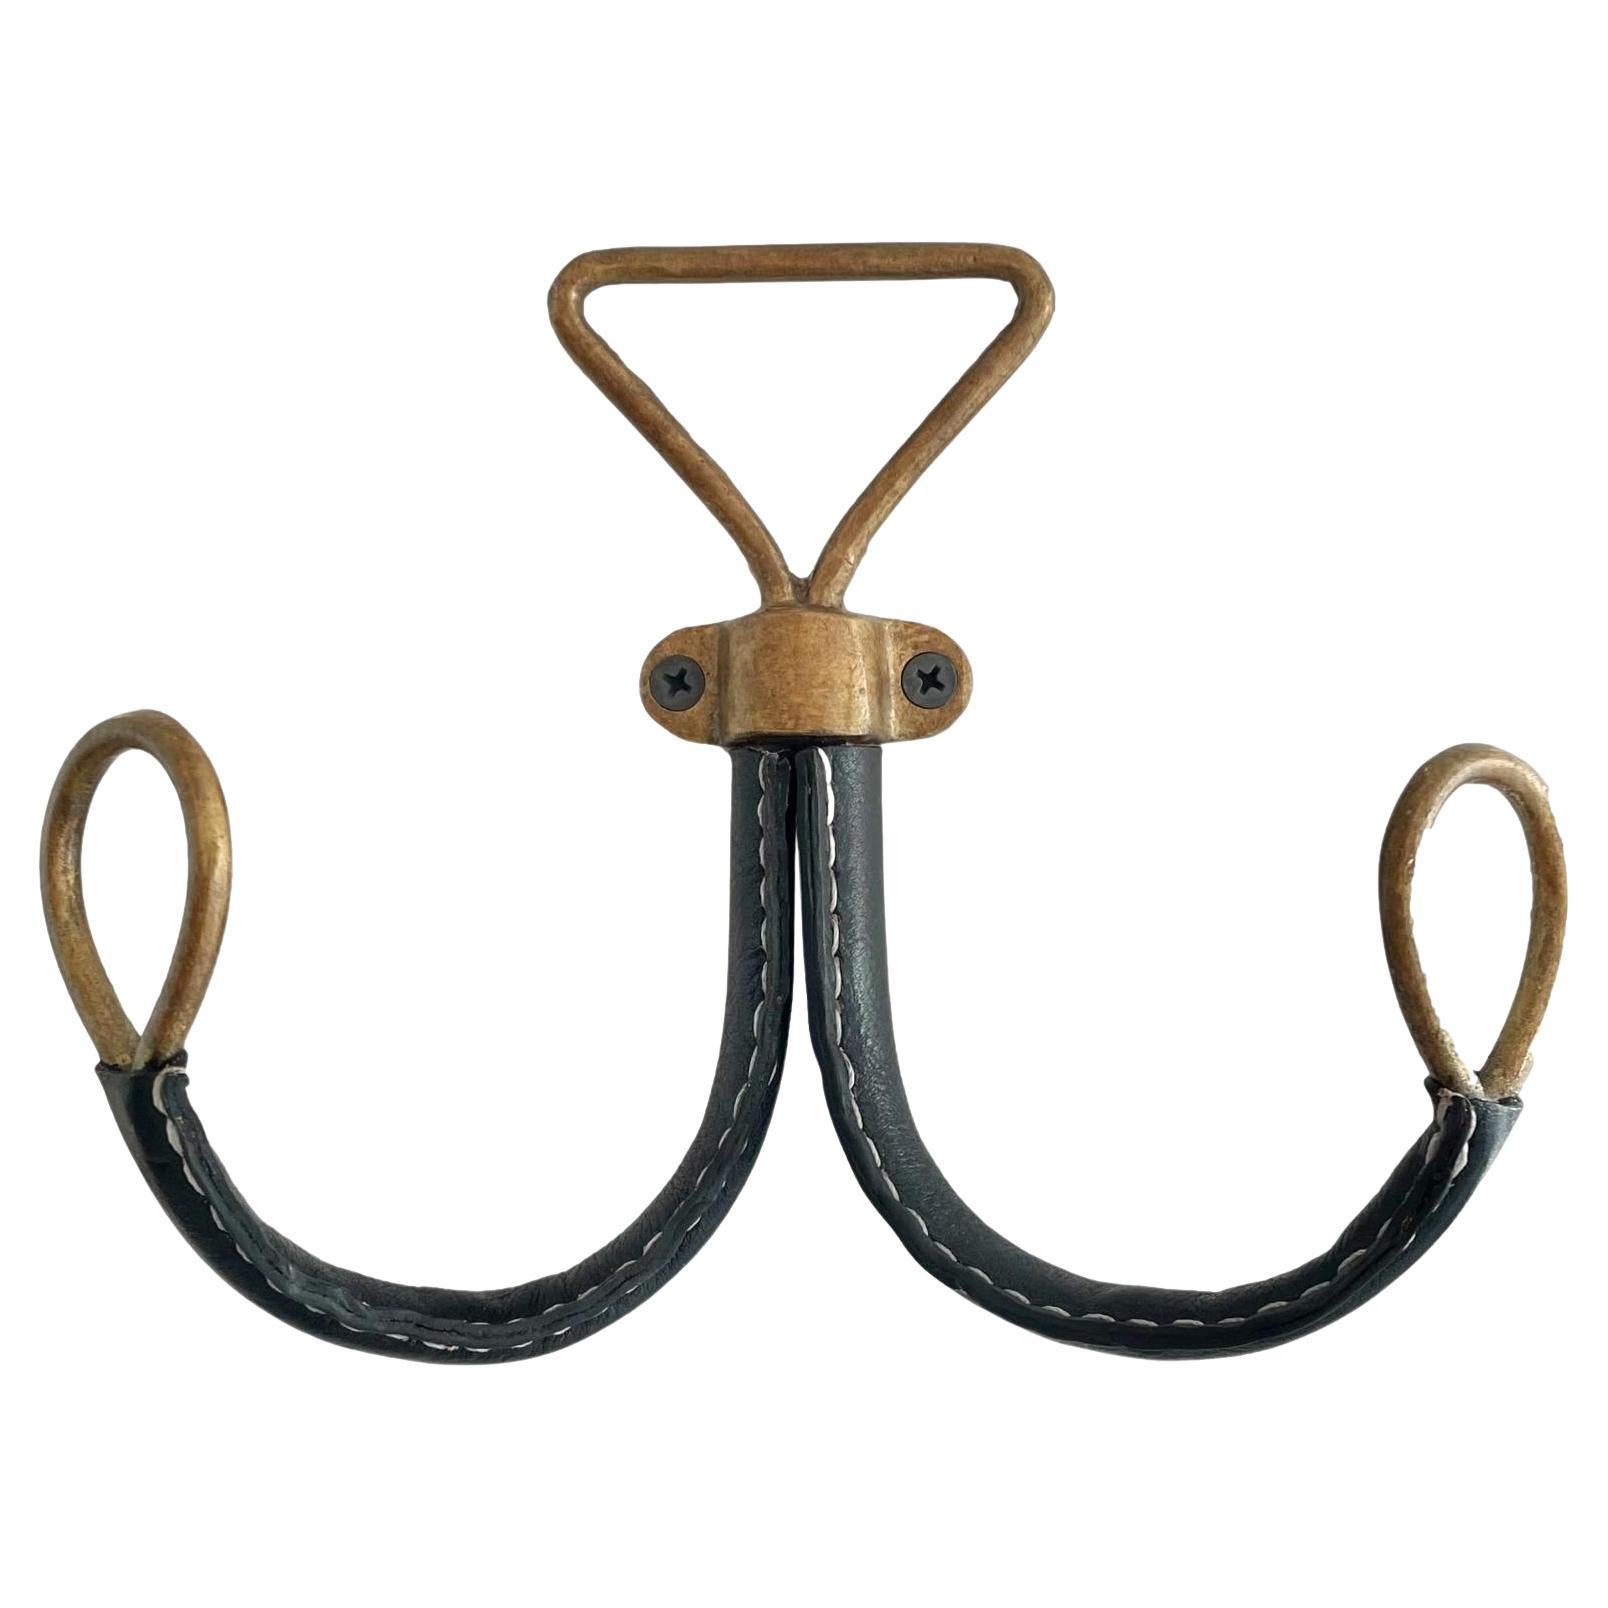 Jacques Adnet Style Leather Hook, 1970s France